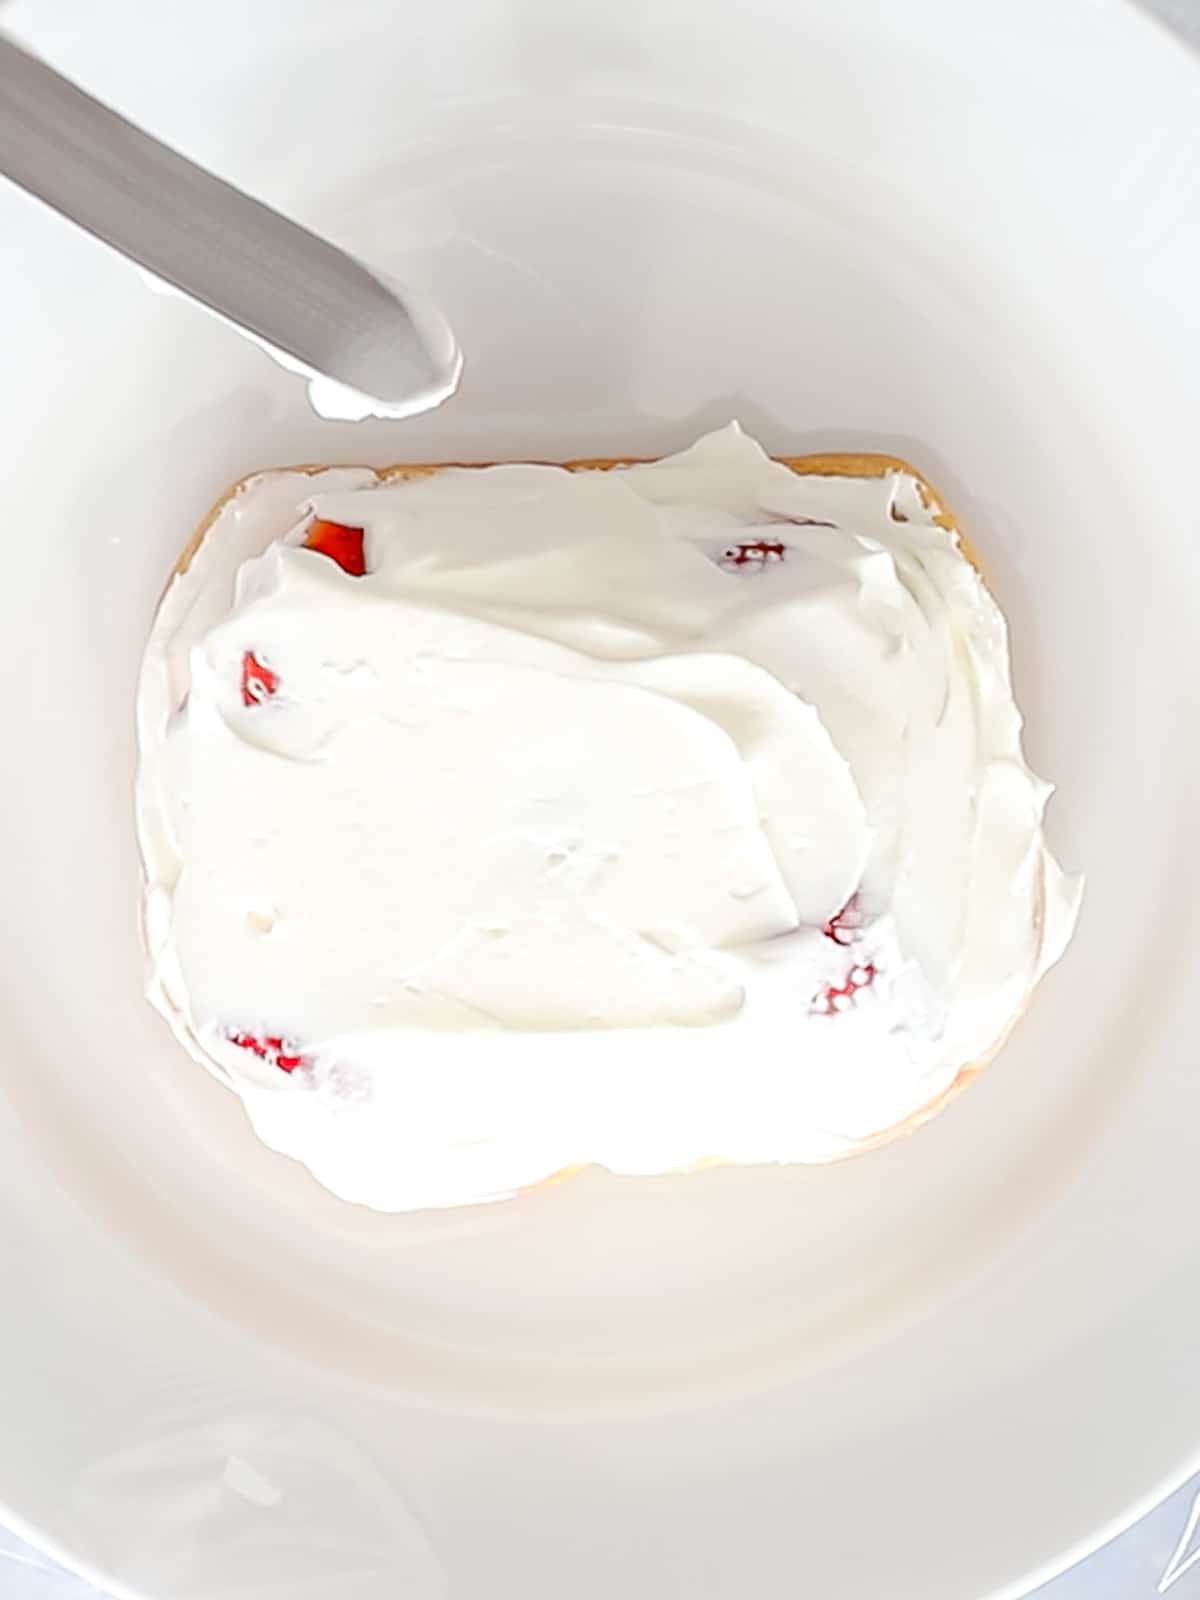 Fluffy whipped cream spread on top of strawberries and milk bread.